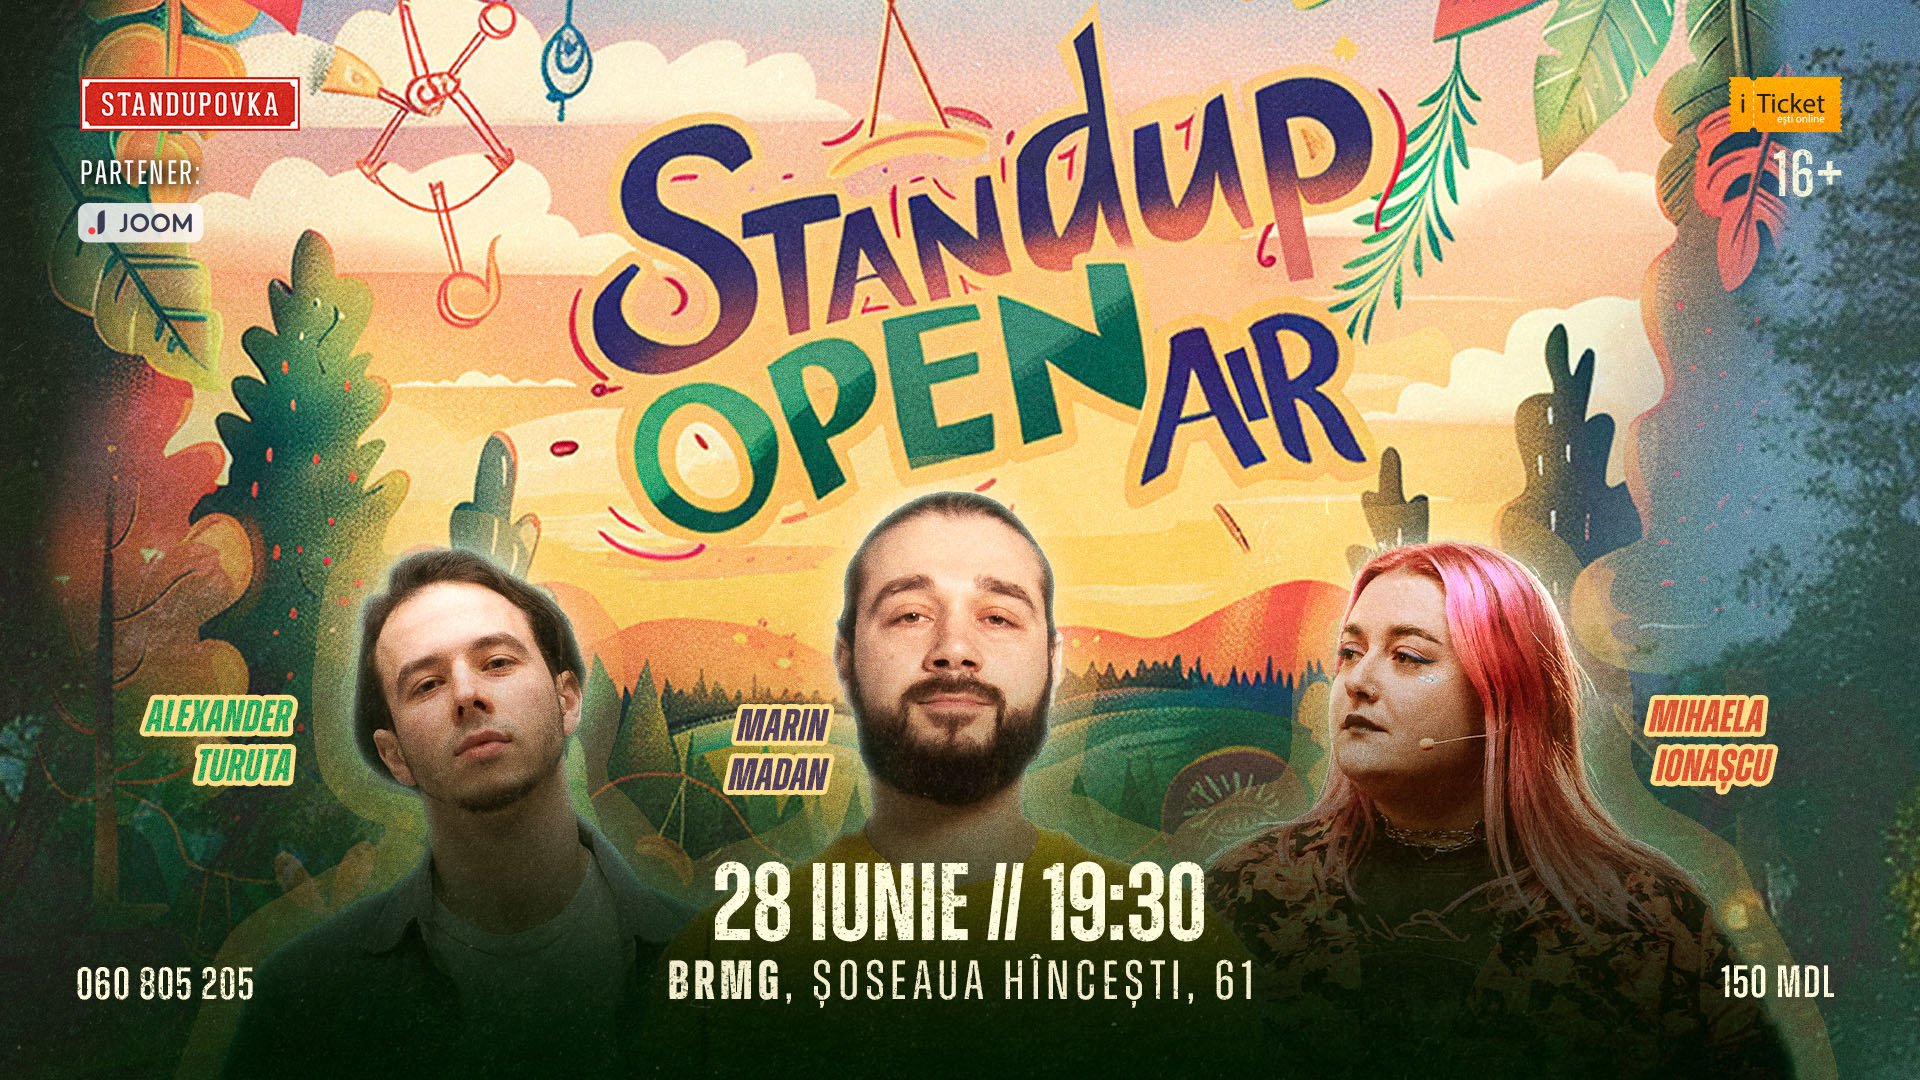 Stand UP Open Air